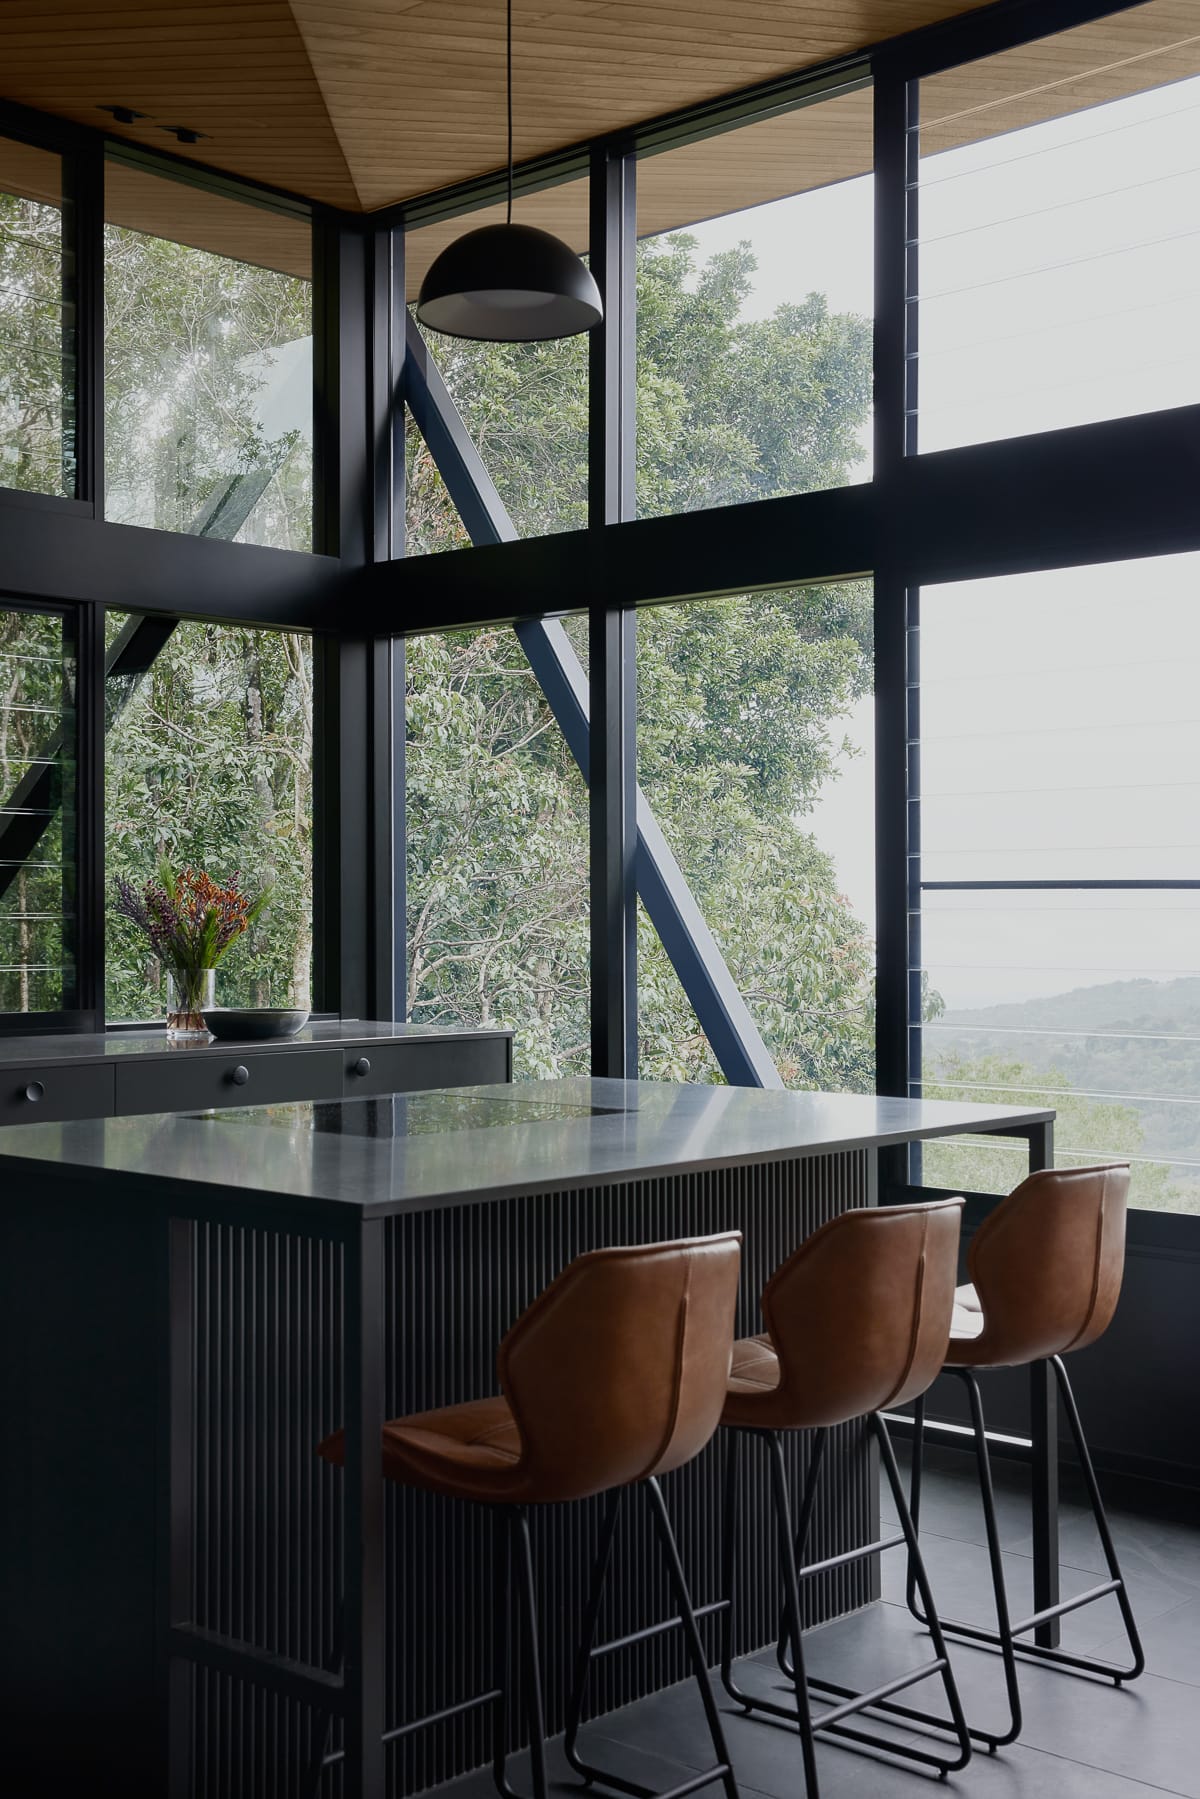 Cloudview Springbrook by Paul Uhlmann Architects. Photography by Brock Beazley. Contemporary residential kitchen with black cabinetry, floors and window frames that overlook a rainforest. Brown leather bar stools. 